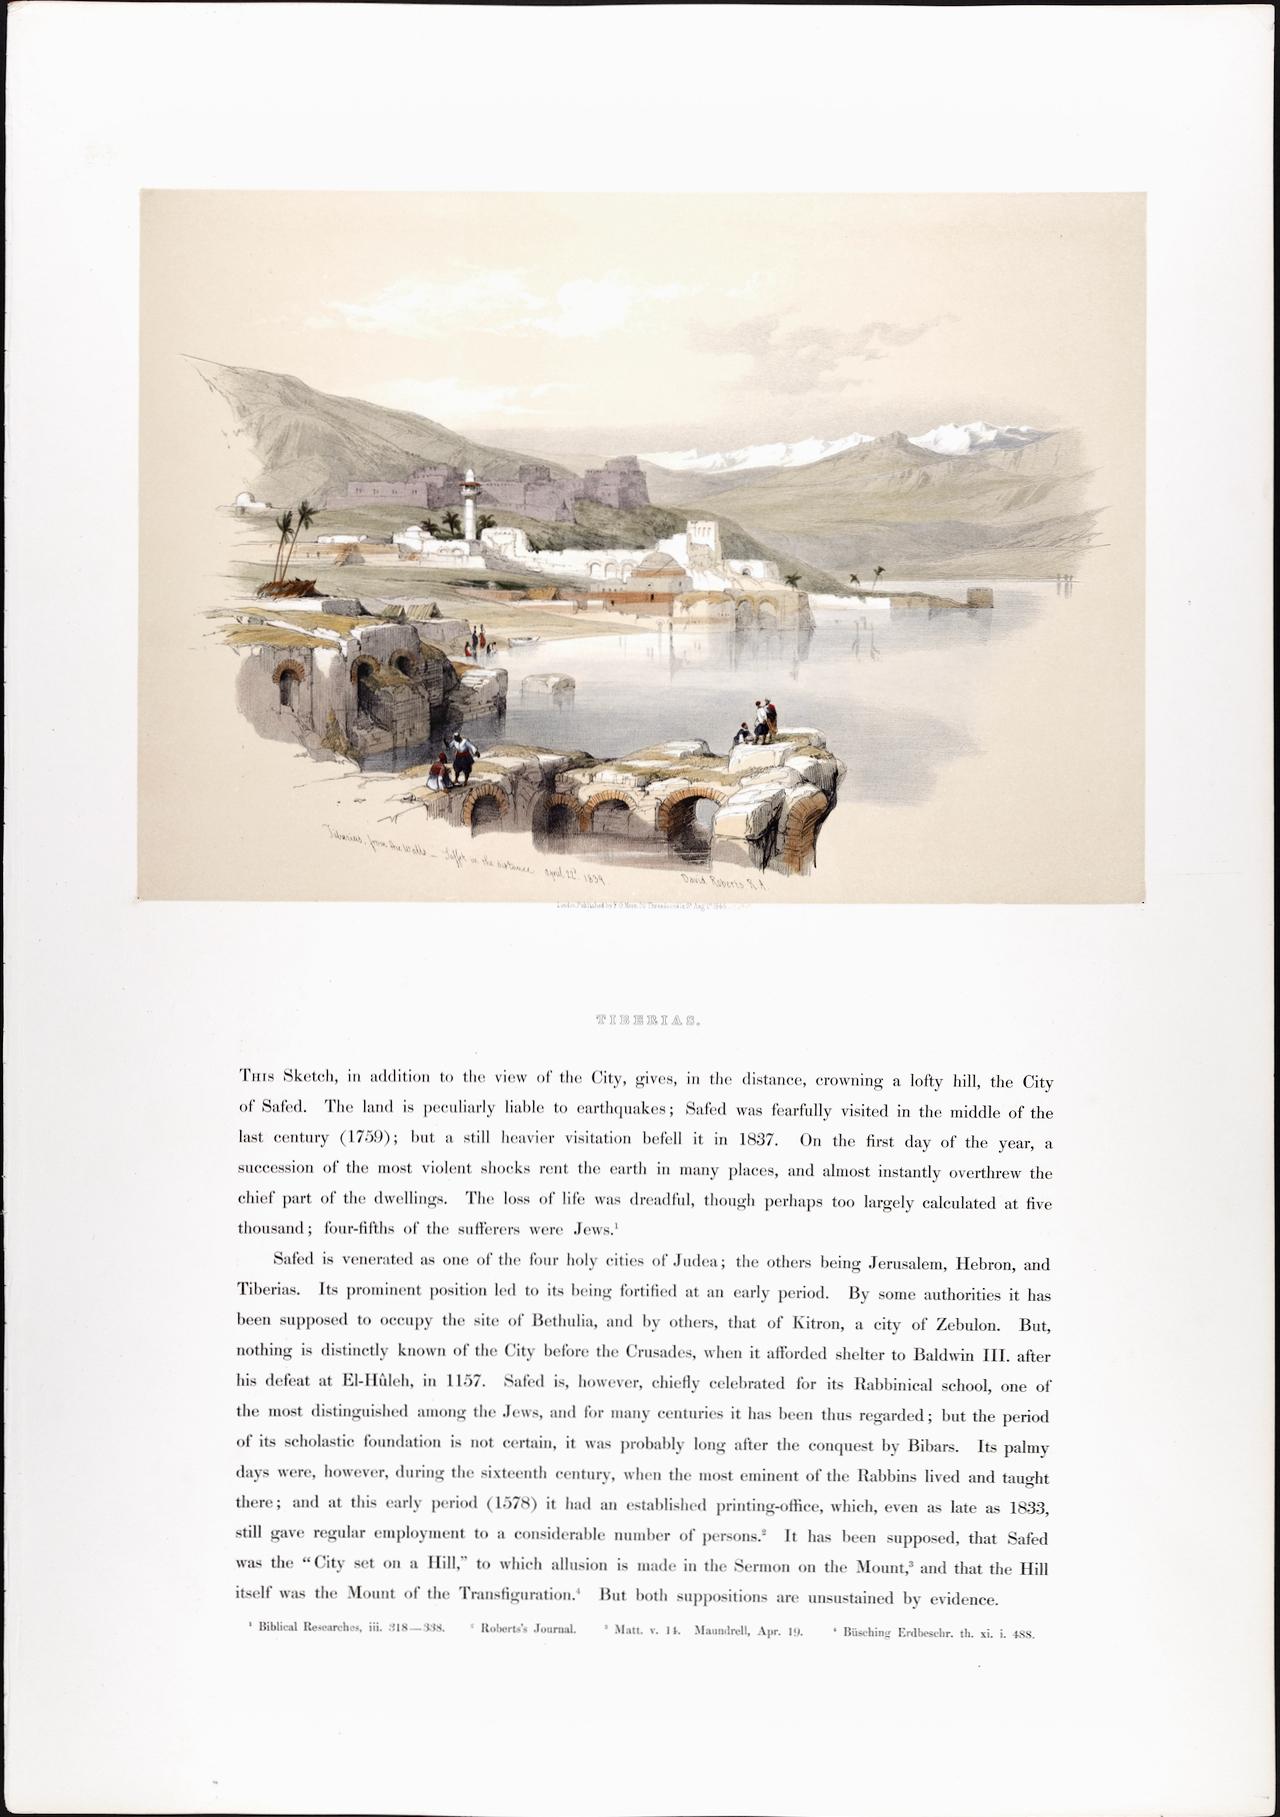 Tiberias from the Walls: David Roberts' 19th C. Hand-colored Lithograph